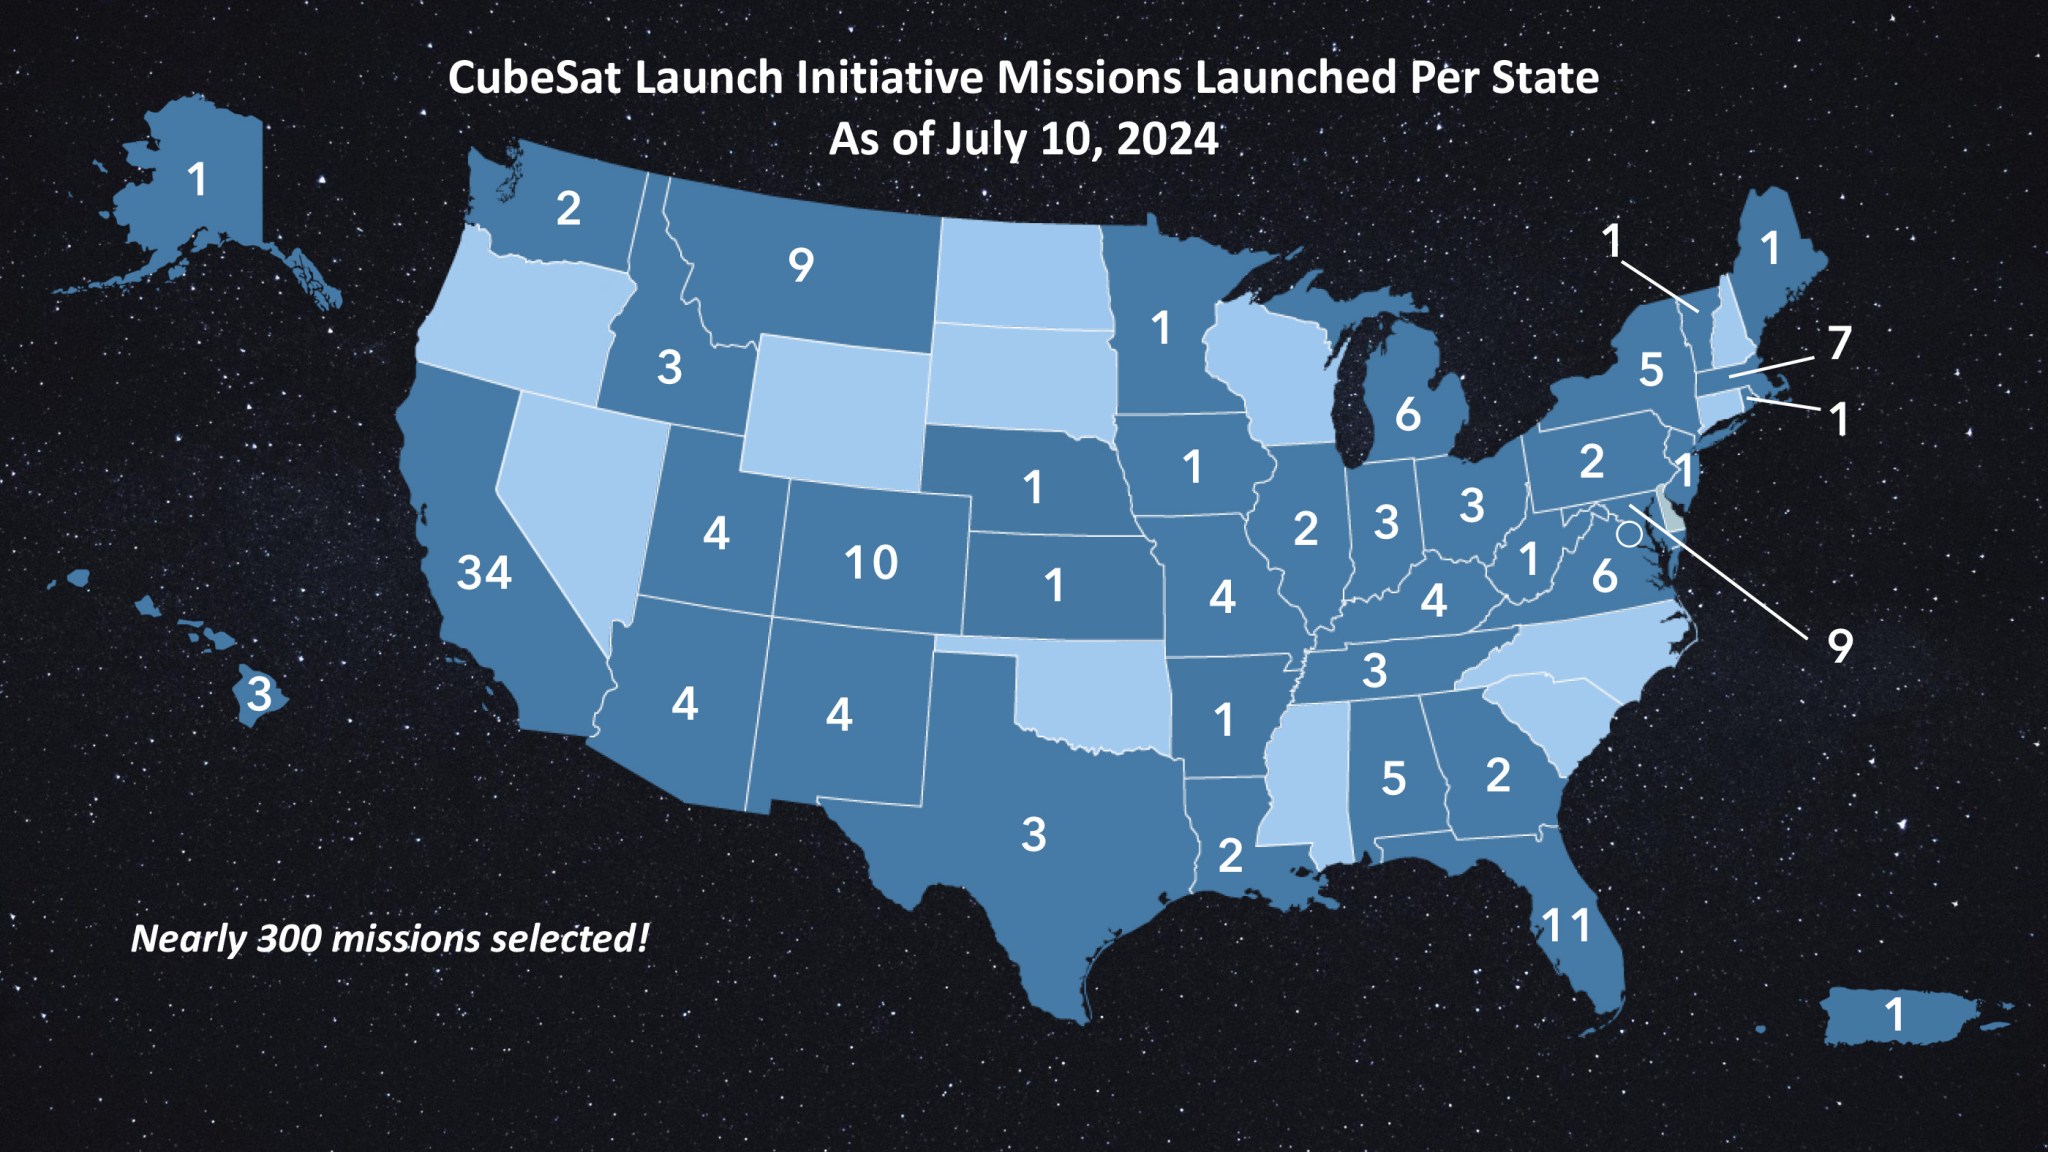 Map of the United States depicting the number of CubeSat Launch Initiative selections by state.